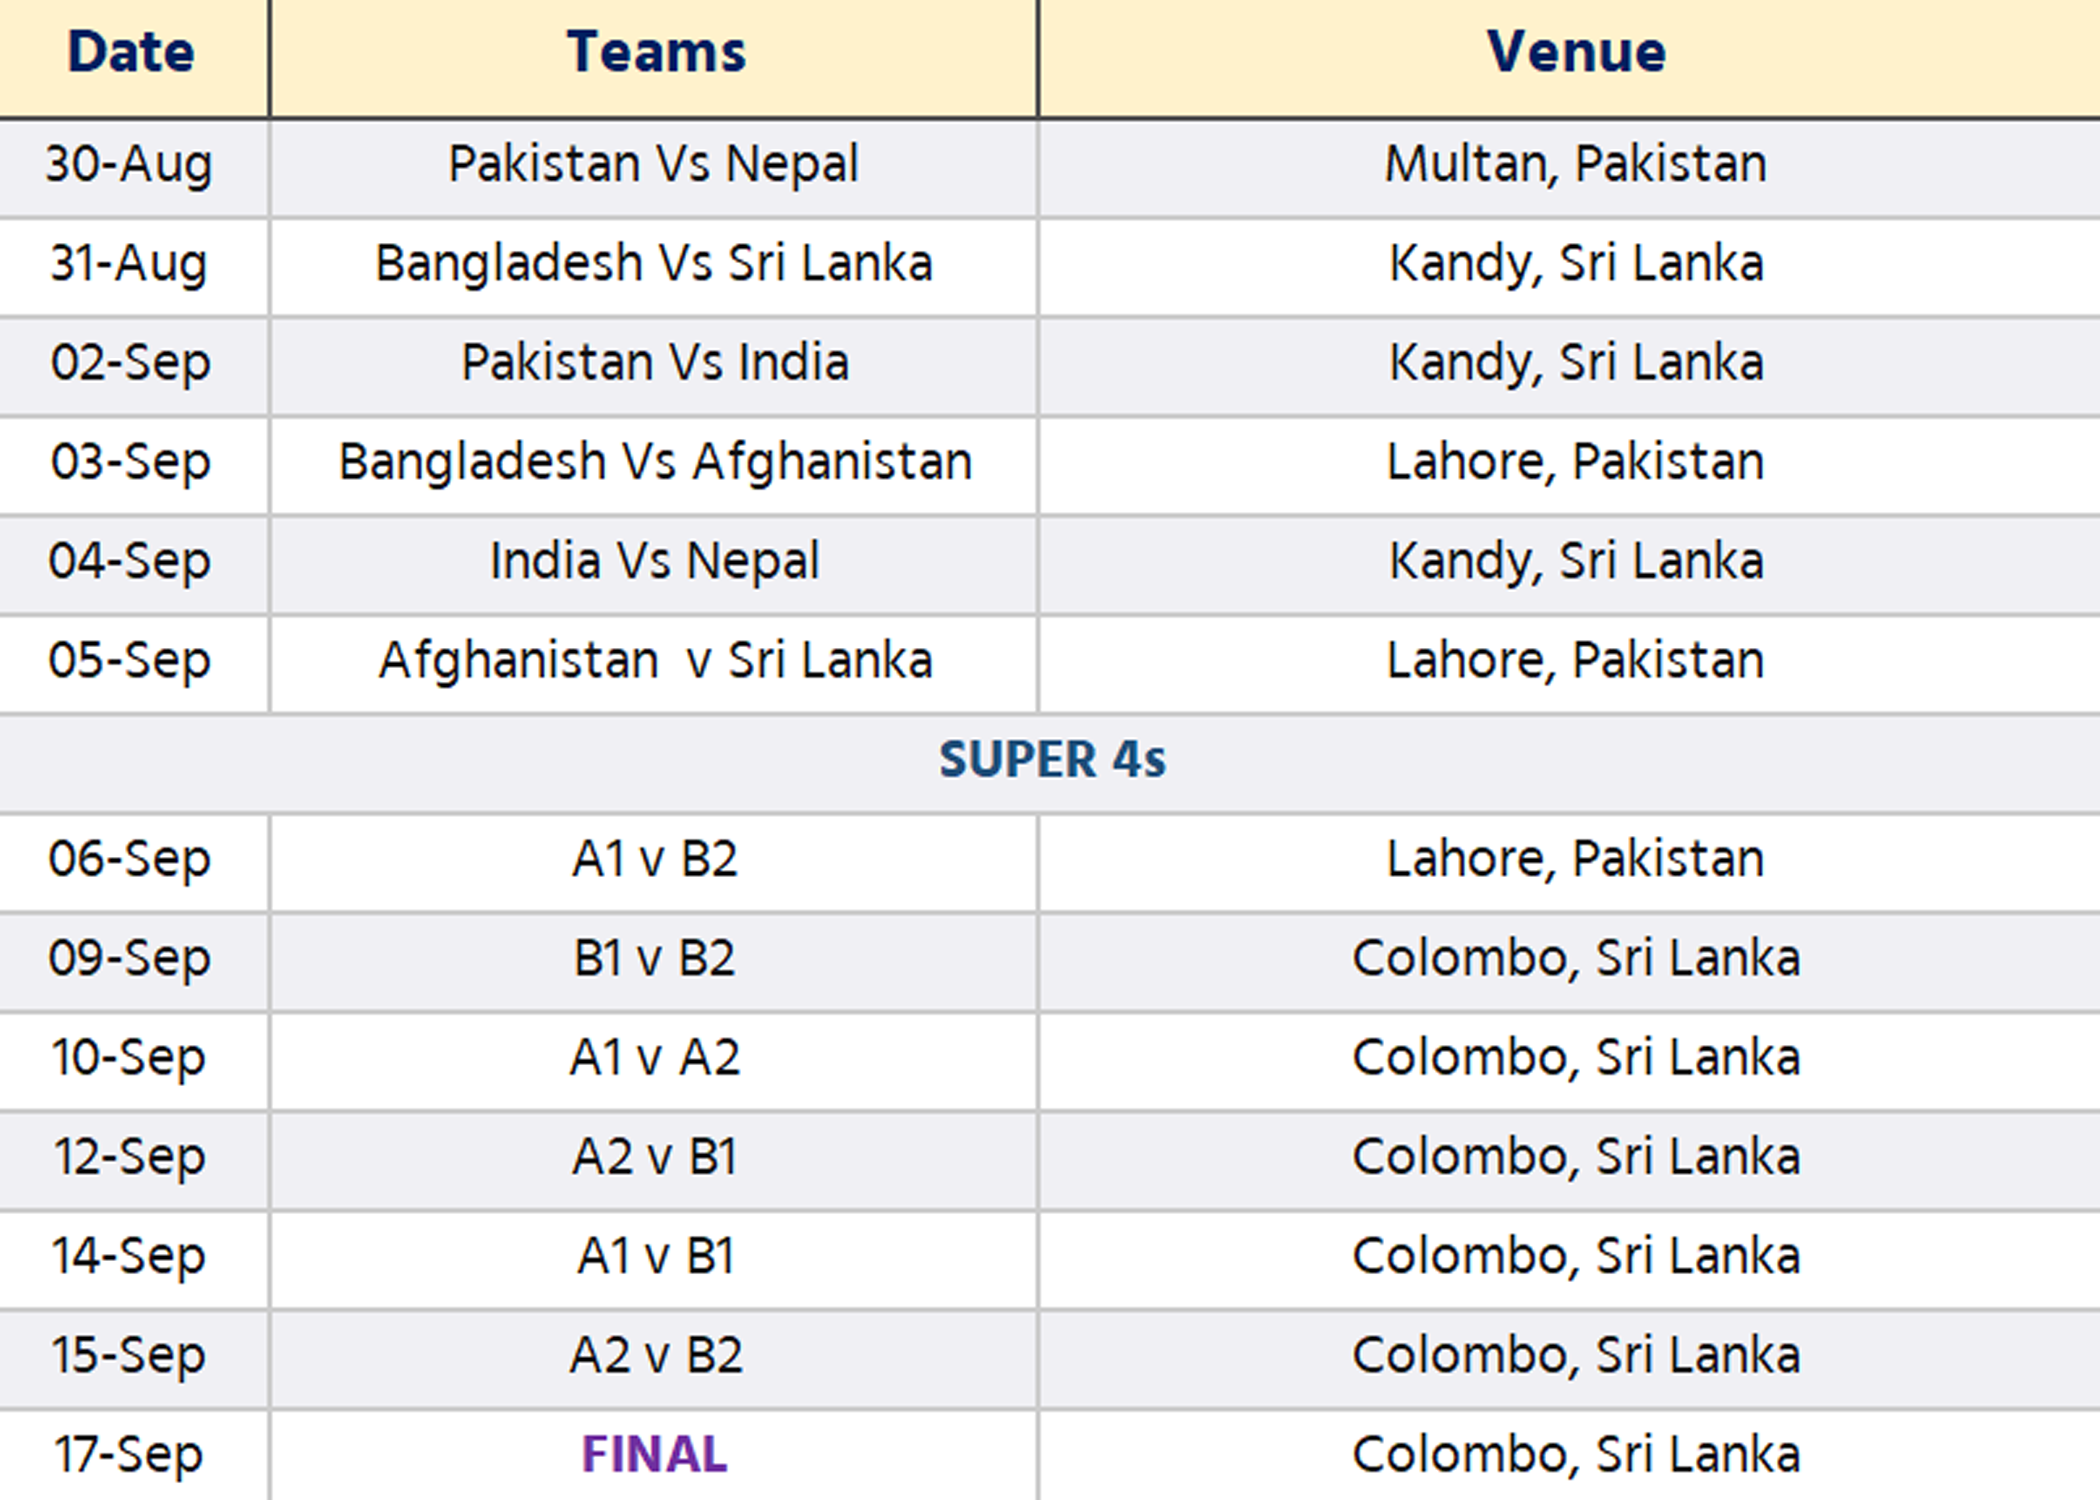 Asia Cup Schedule